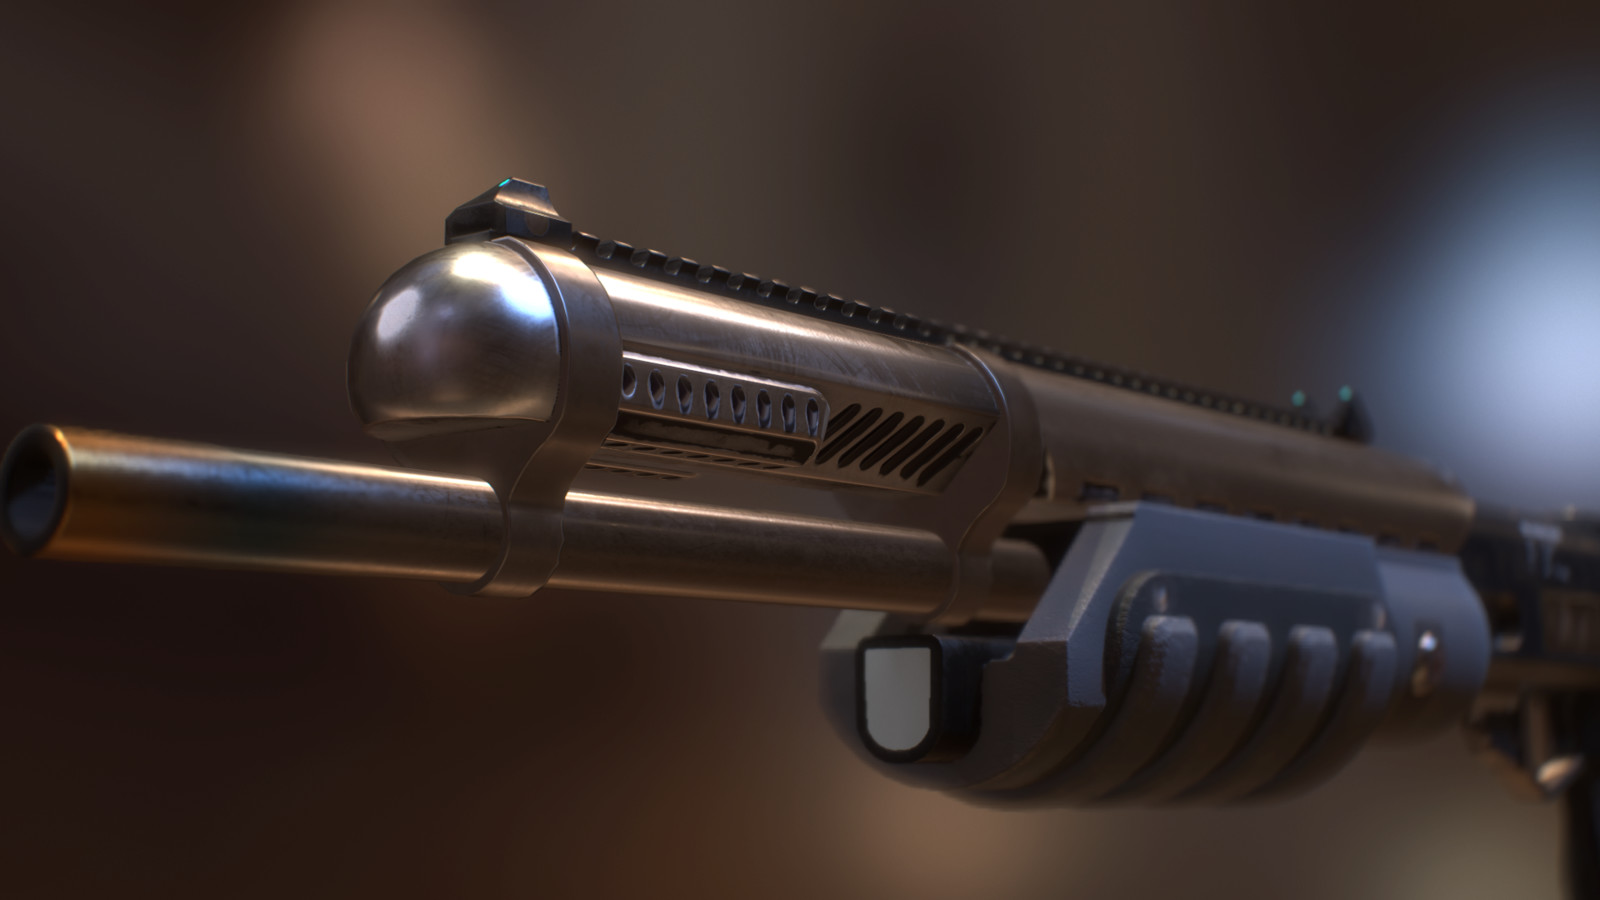 I wanted it to look a bit meaner than the average sci fi gun asset, and that meant sacrificing authenticity for cool points like this dirty, heat-warped barrel and the black stuff (soot?) dripping from the gastube thing. Or is it the magazine? Who am I?